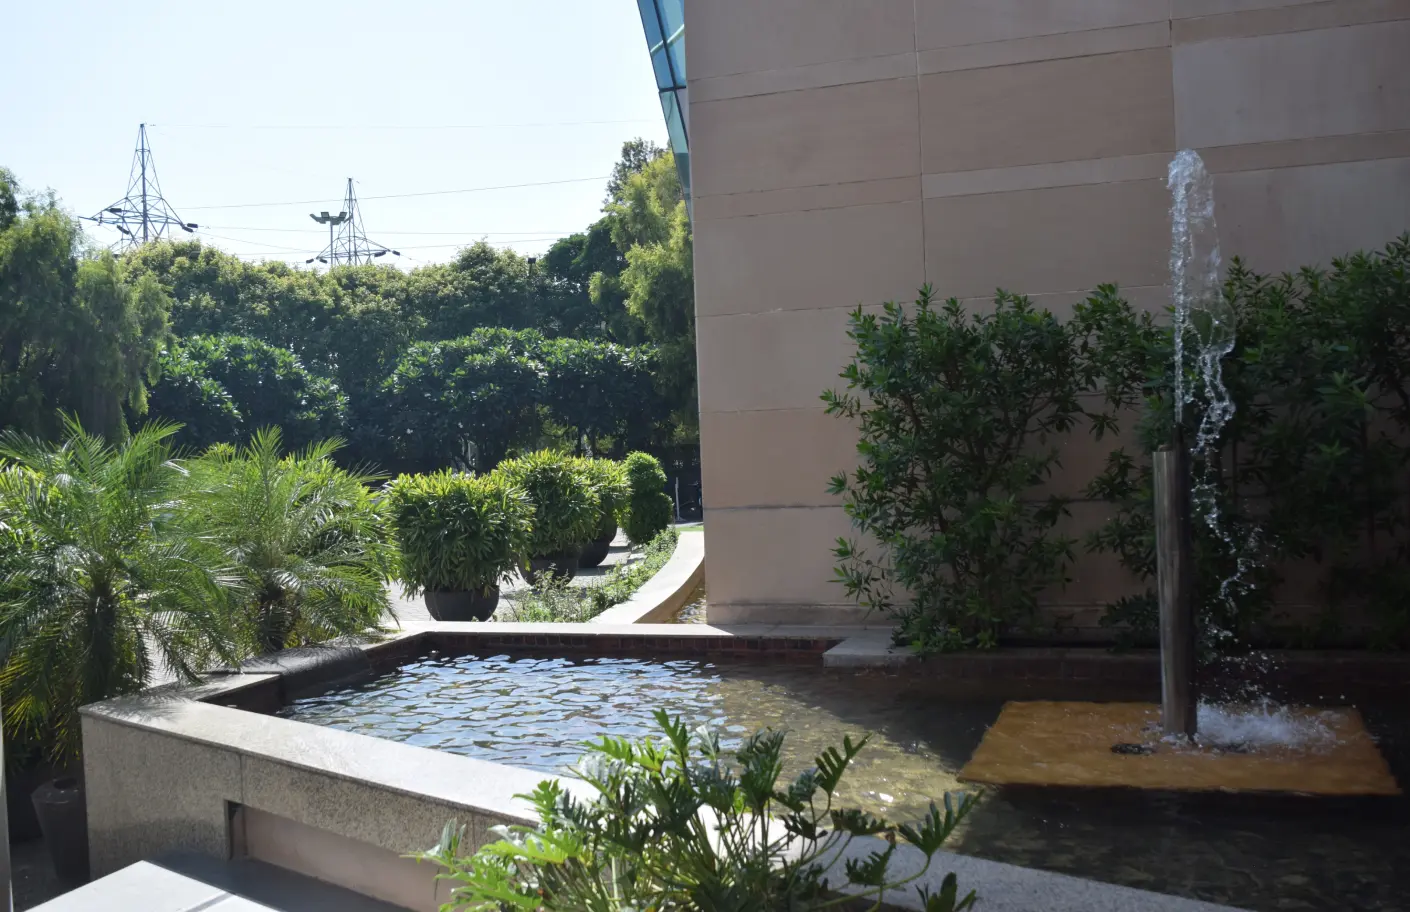 A courtyard fountain with trees & lush greenery around it captures the need of nature in the office